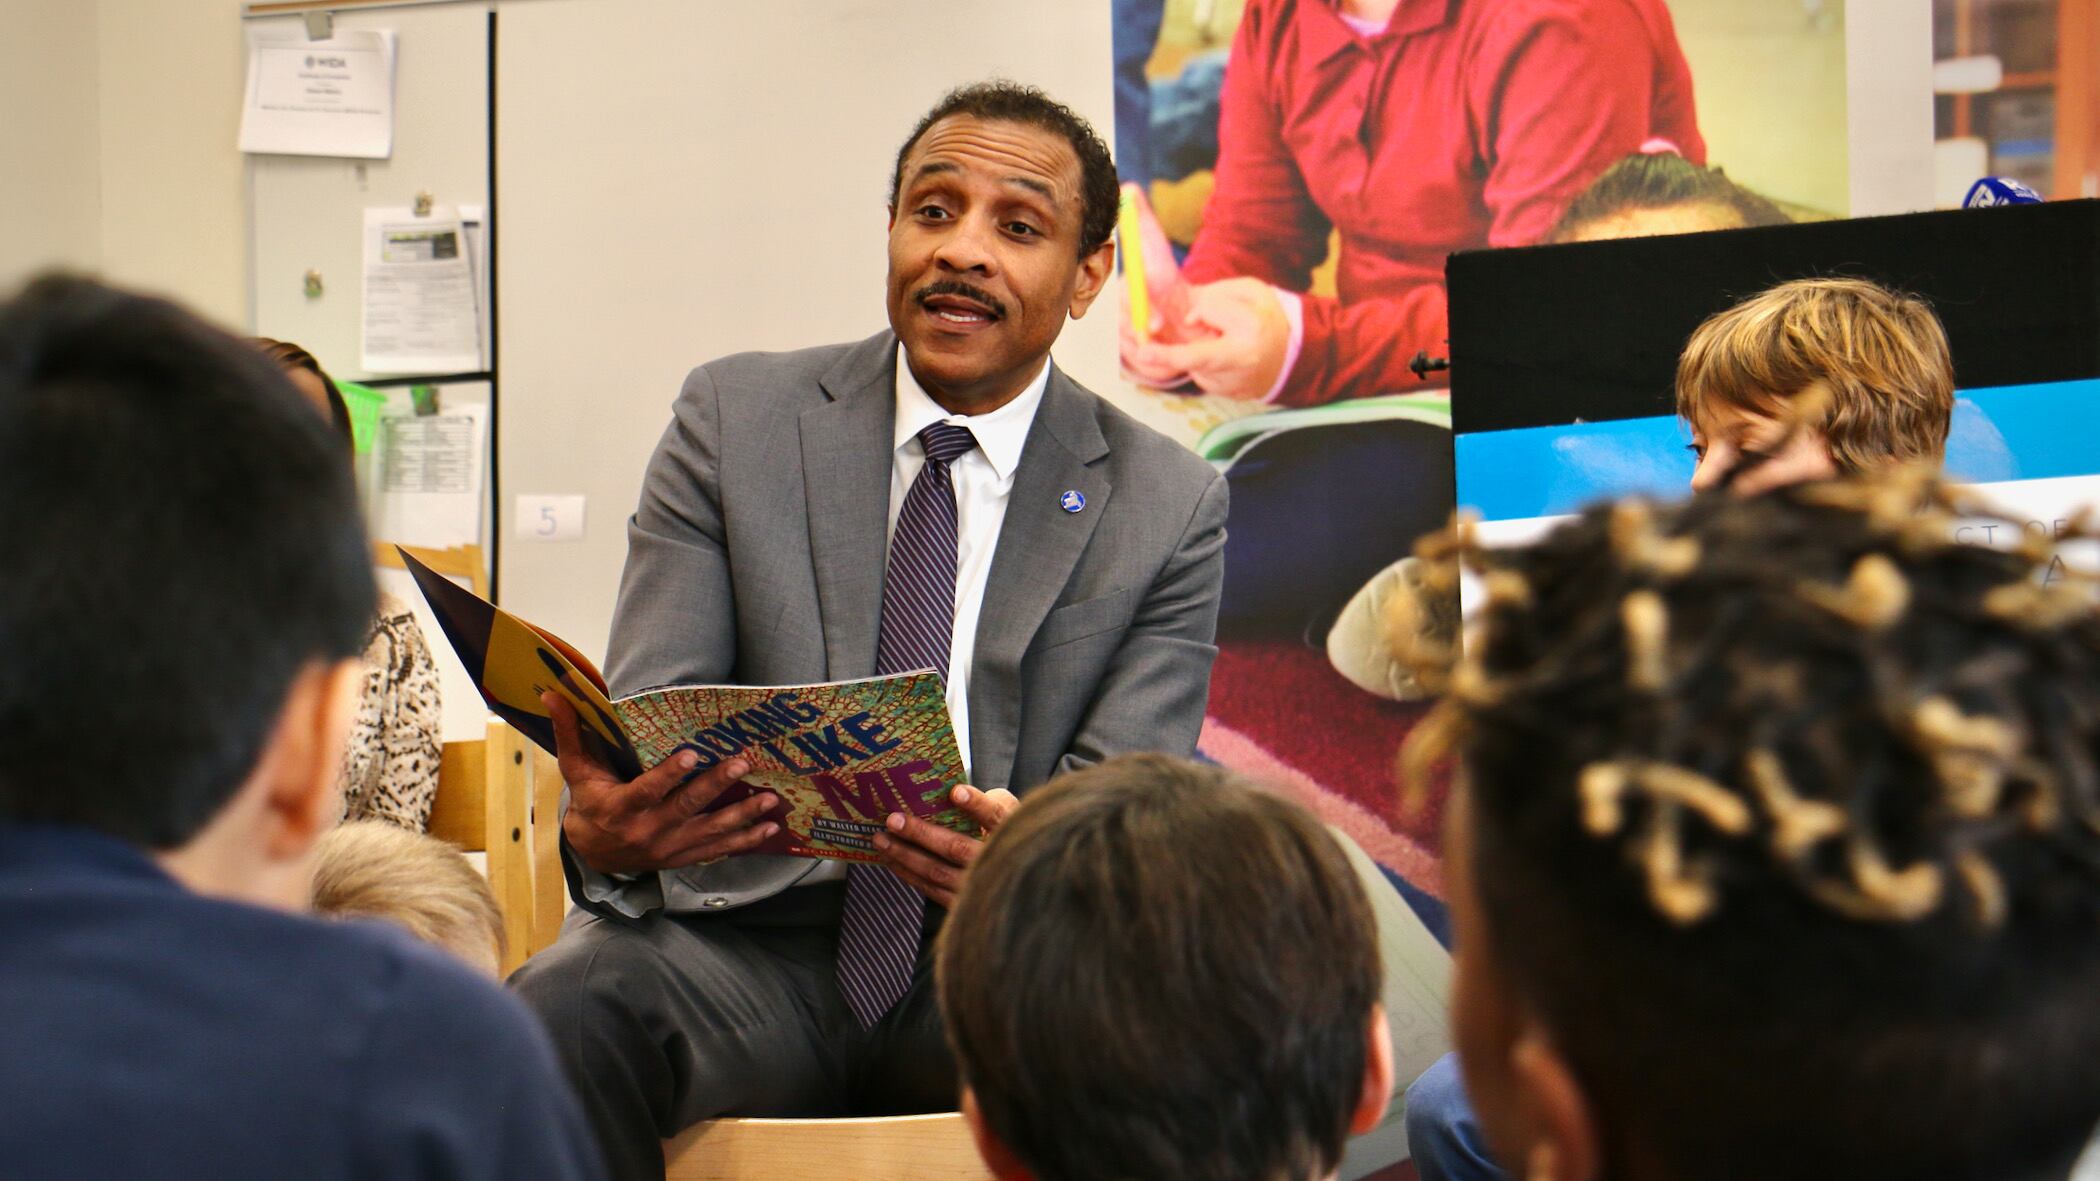 A man in a gray suit reads a book to young children